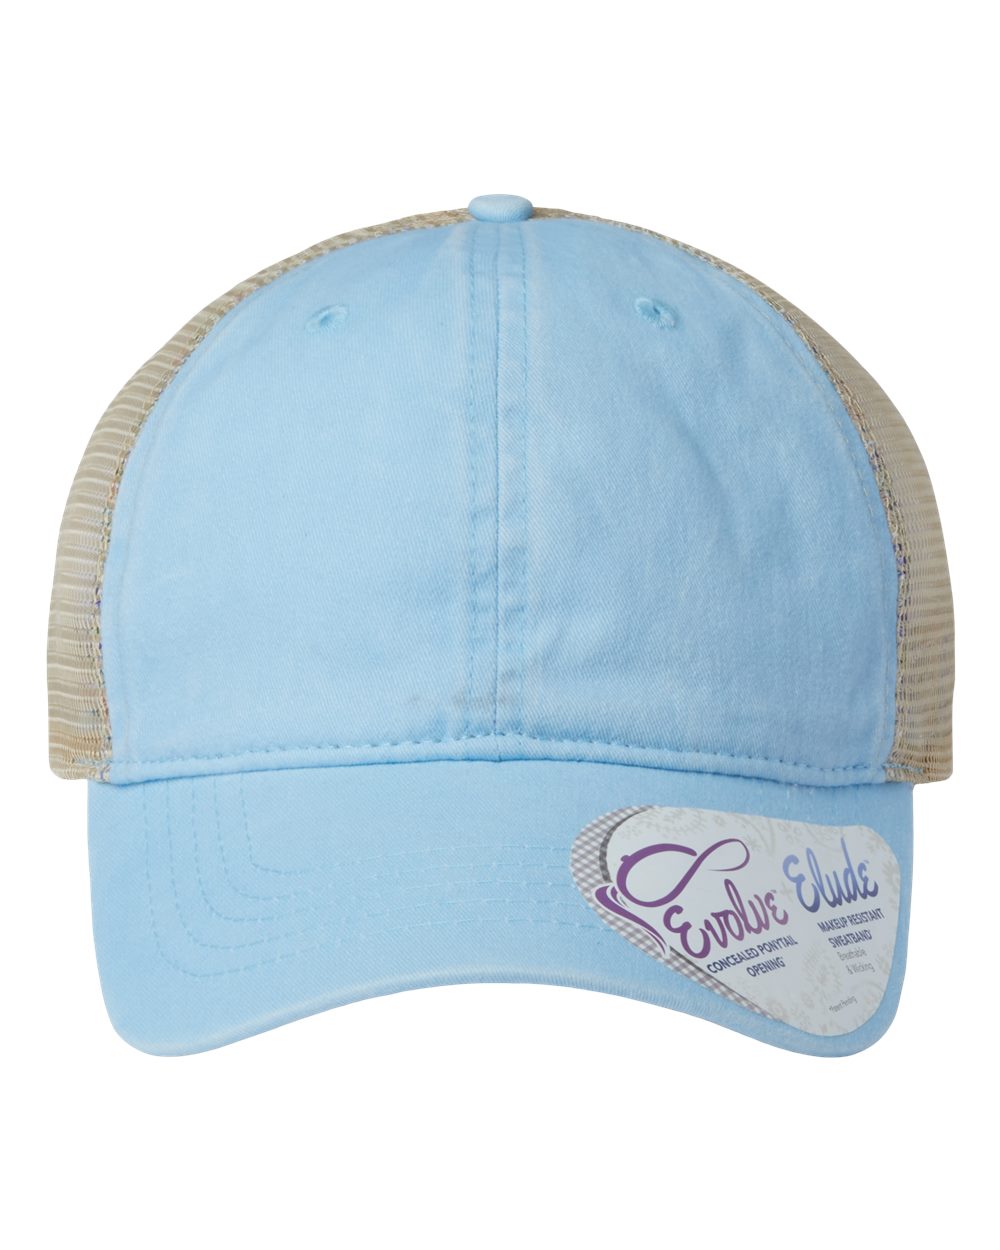 A women's washed mesh-back cap in cashmere blue with floral pattern on the front panel.